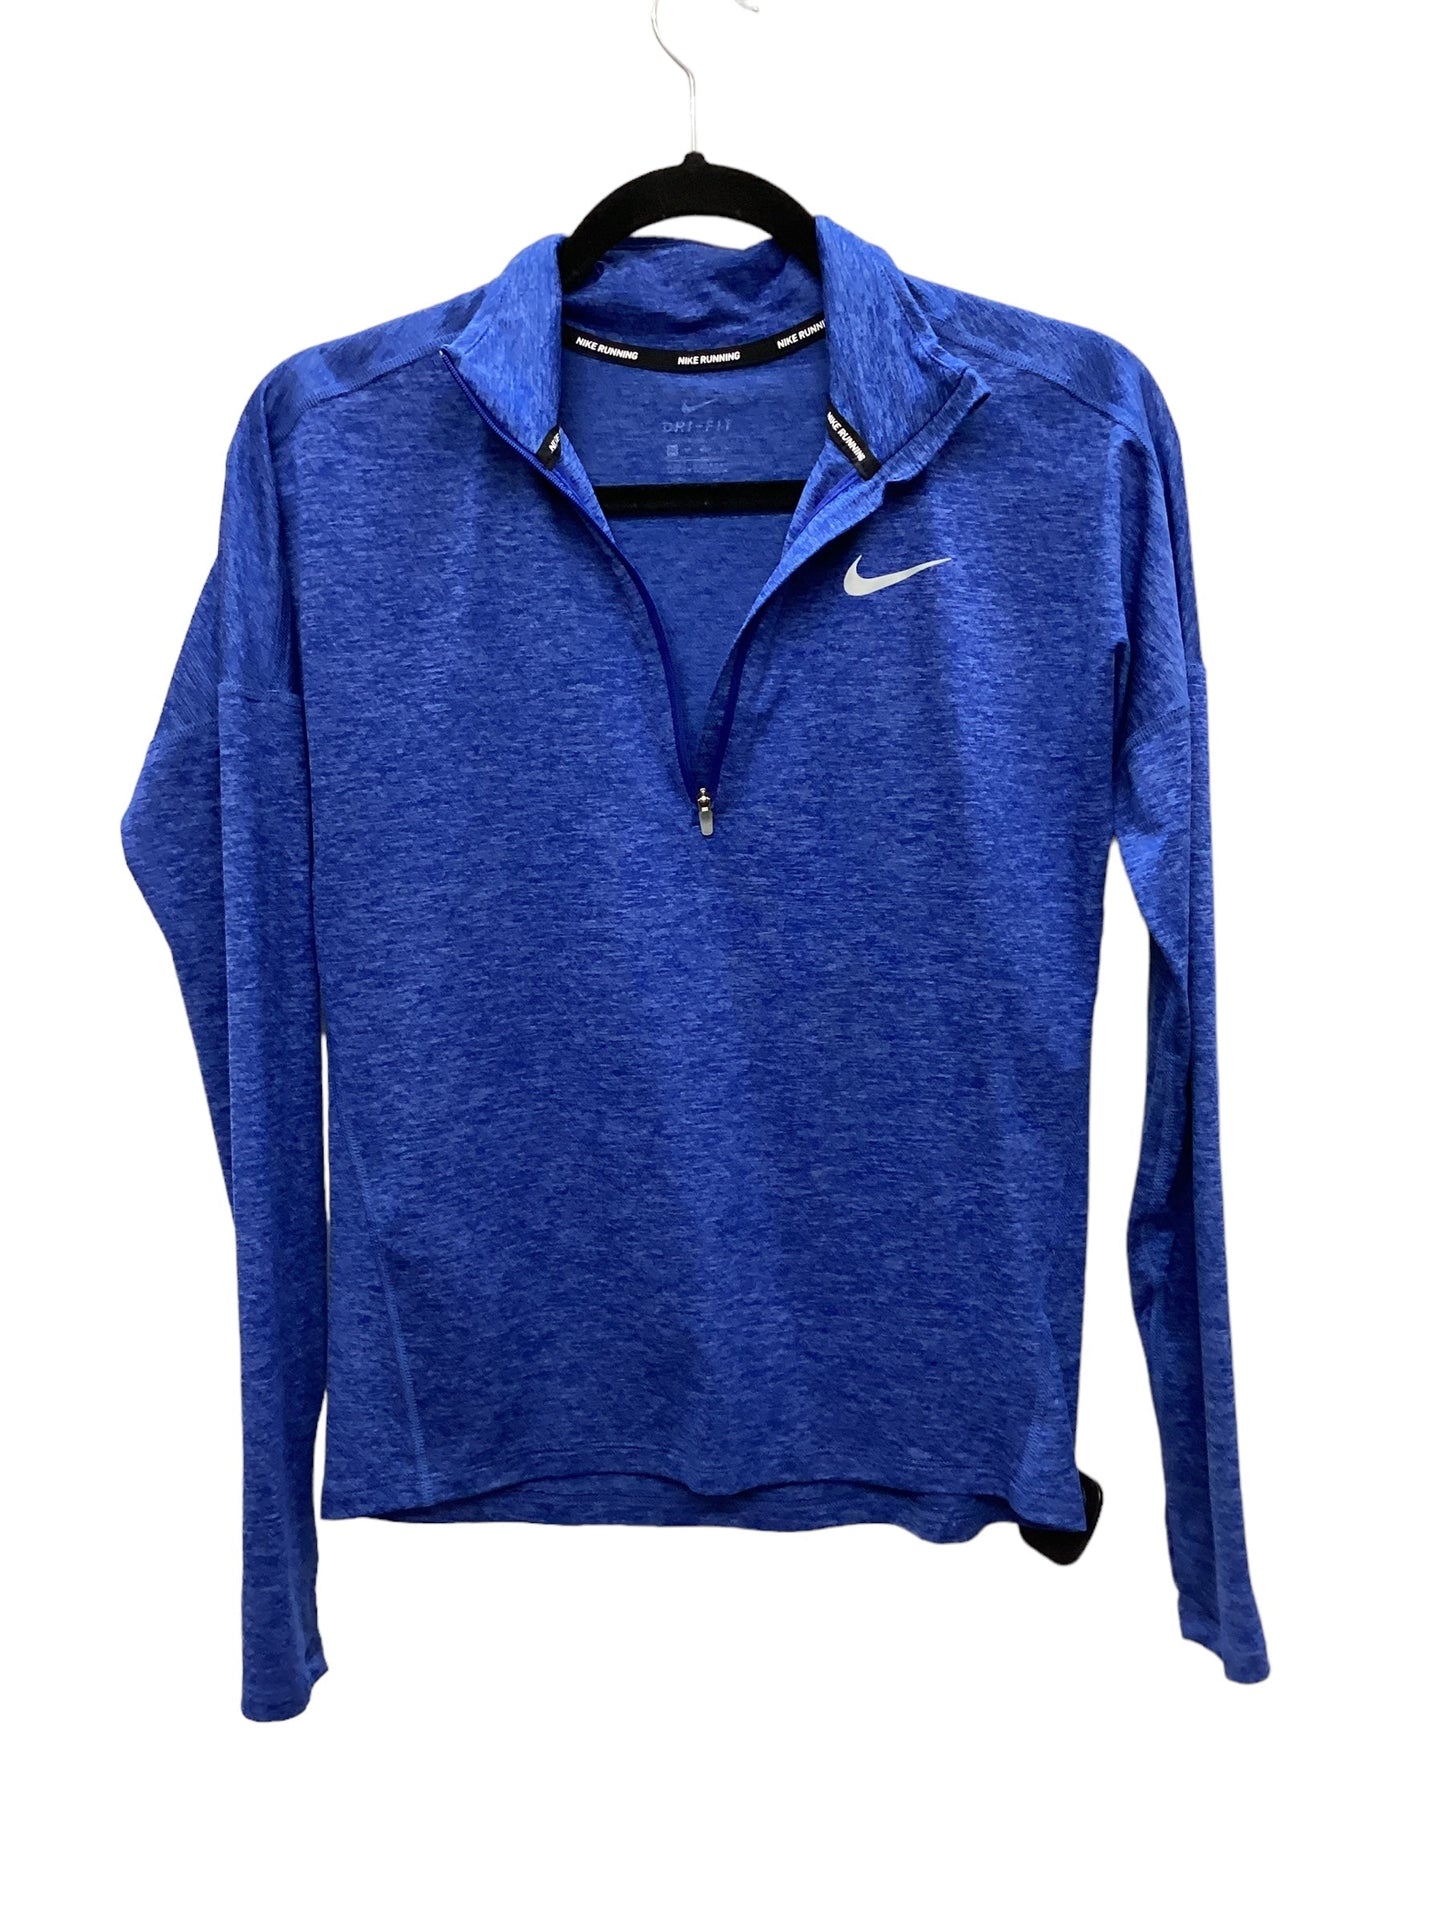 Blue Athletic Top Long Sleeve Collar Nike Apparel, Size Xs